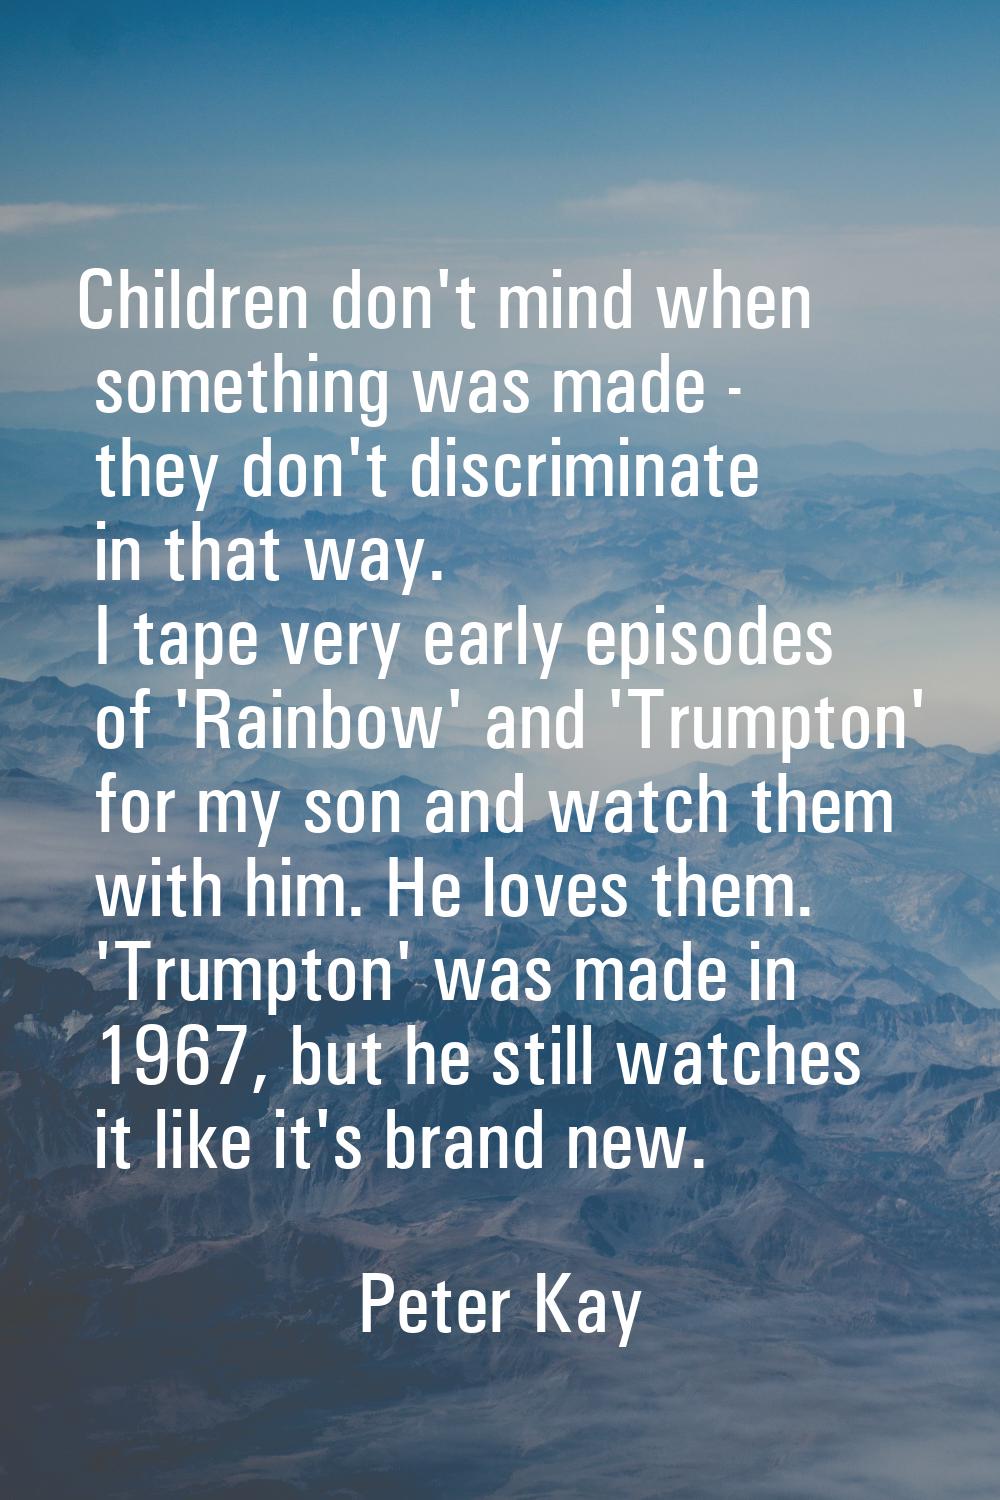 Children don't mind when something was made - they don't discriminate in that way. I tape very earl